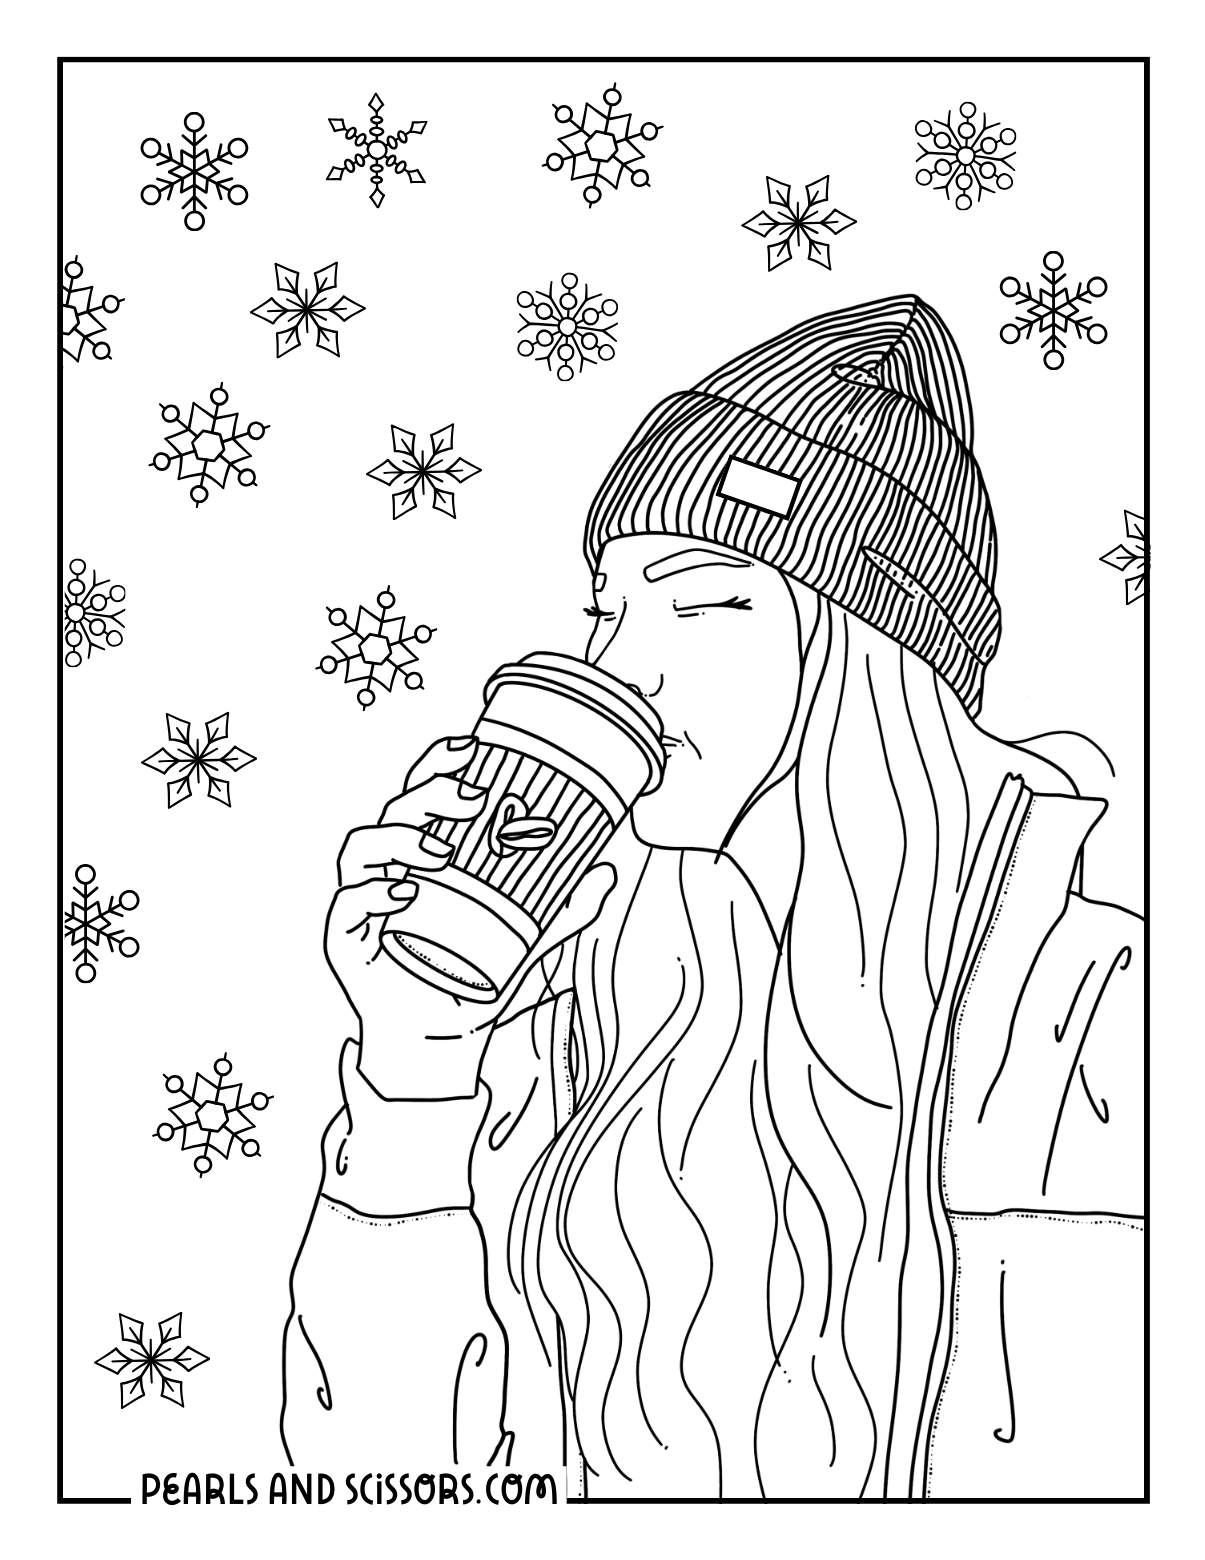 Woman sipping a hot chocolate winter coloring page.